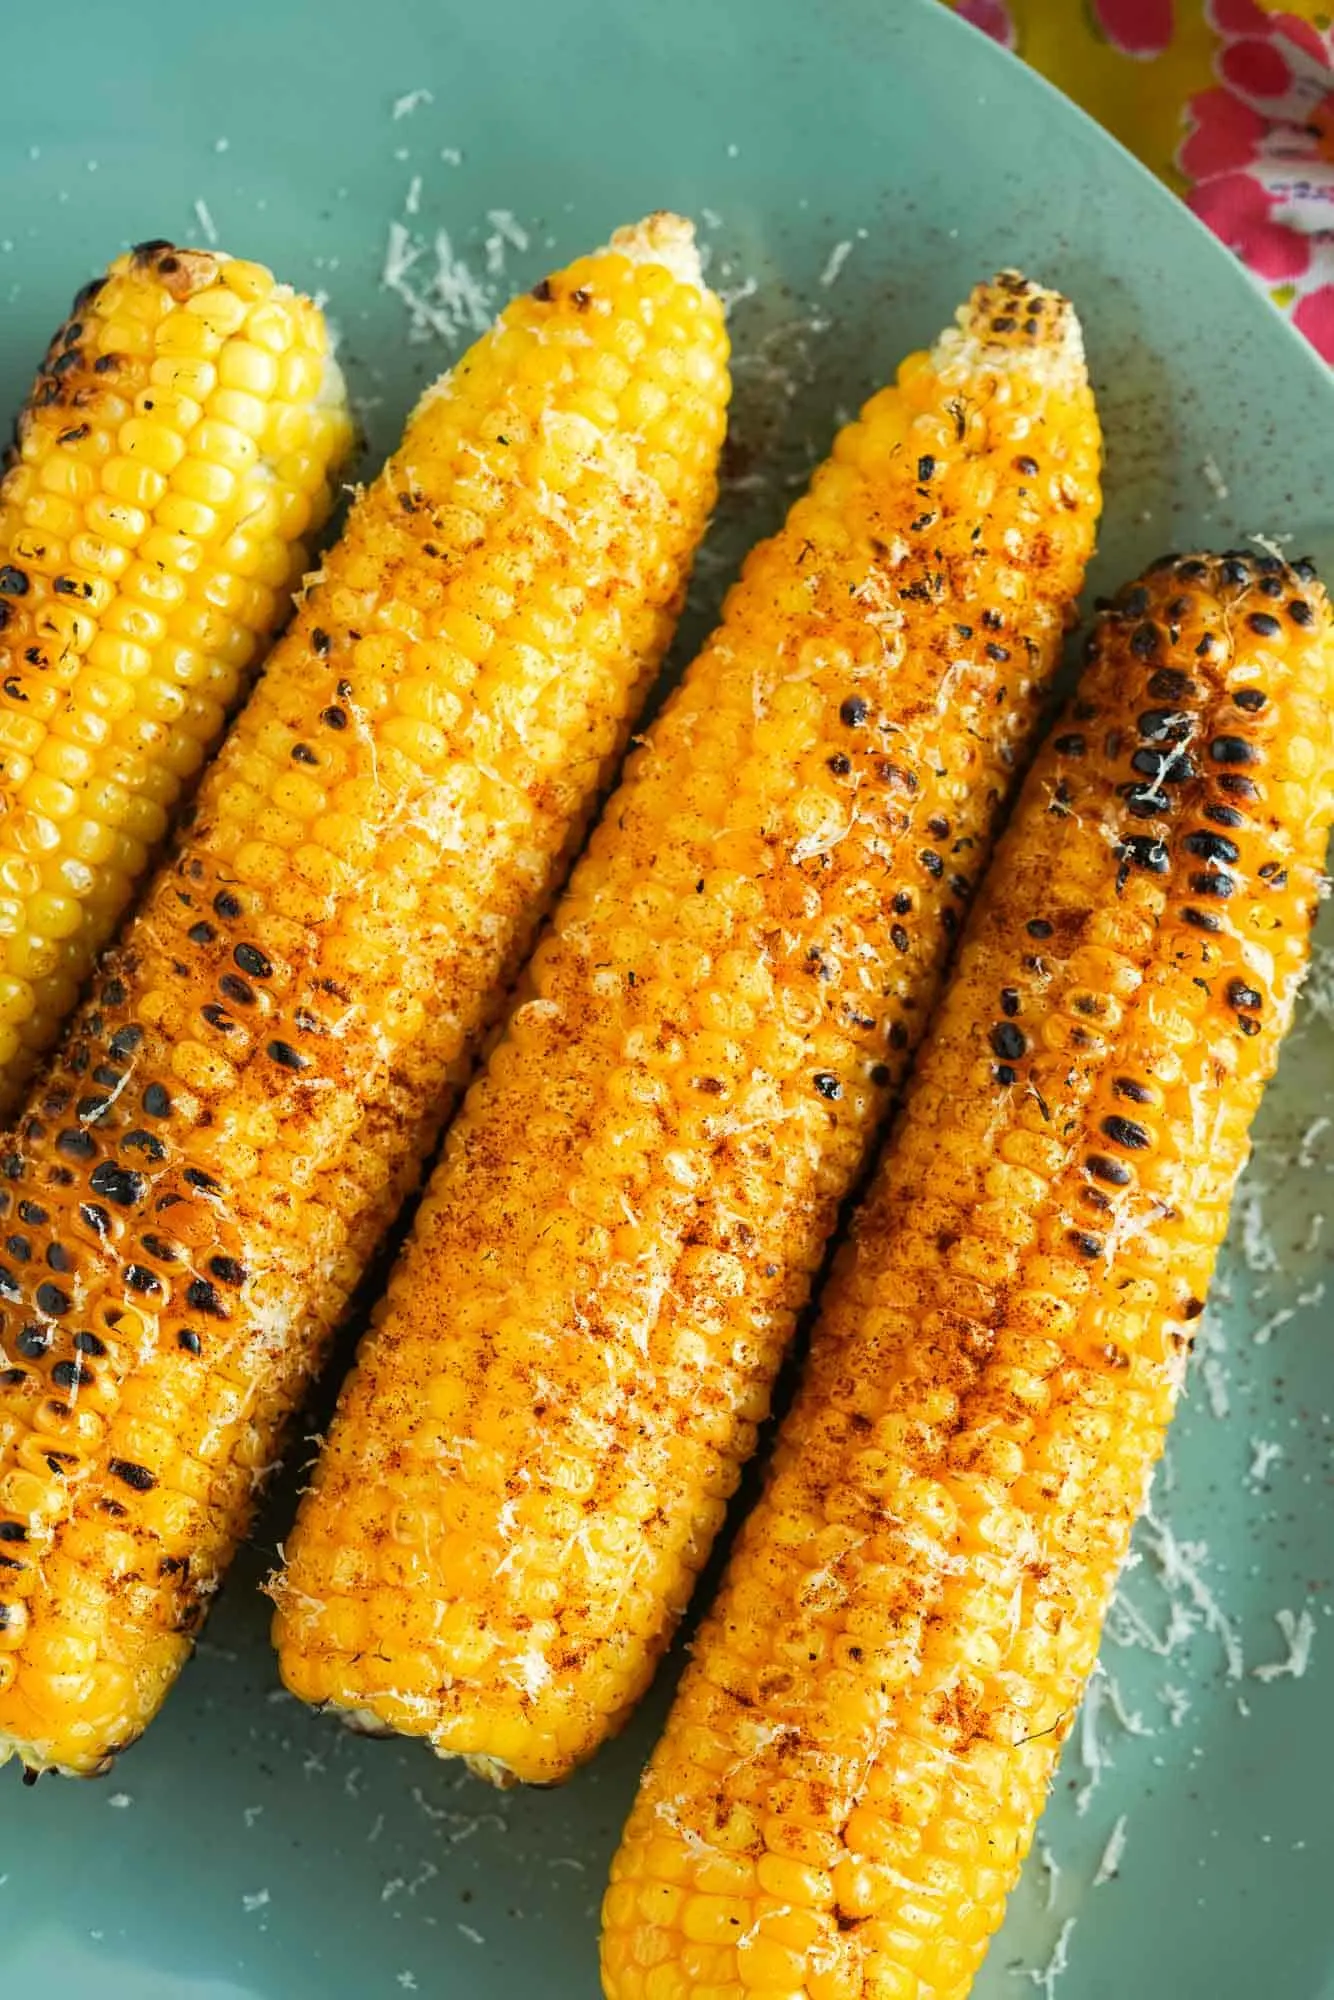 A close up of grilled corn on a plate.